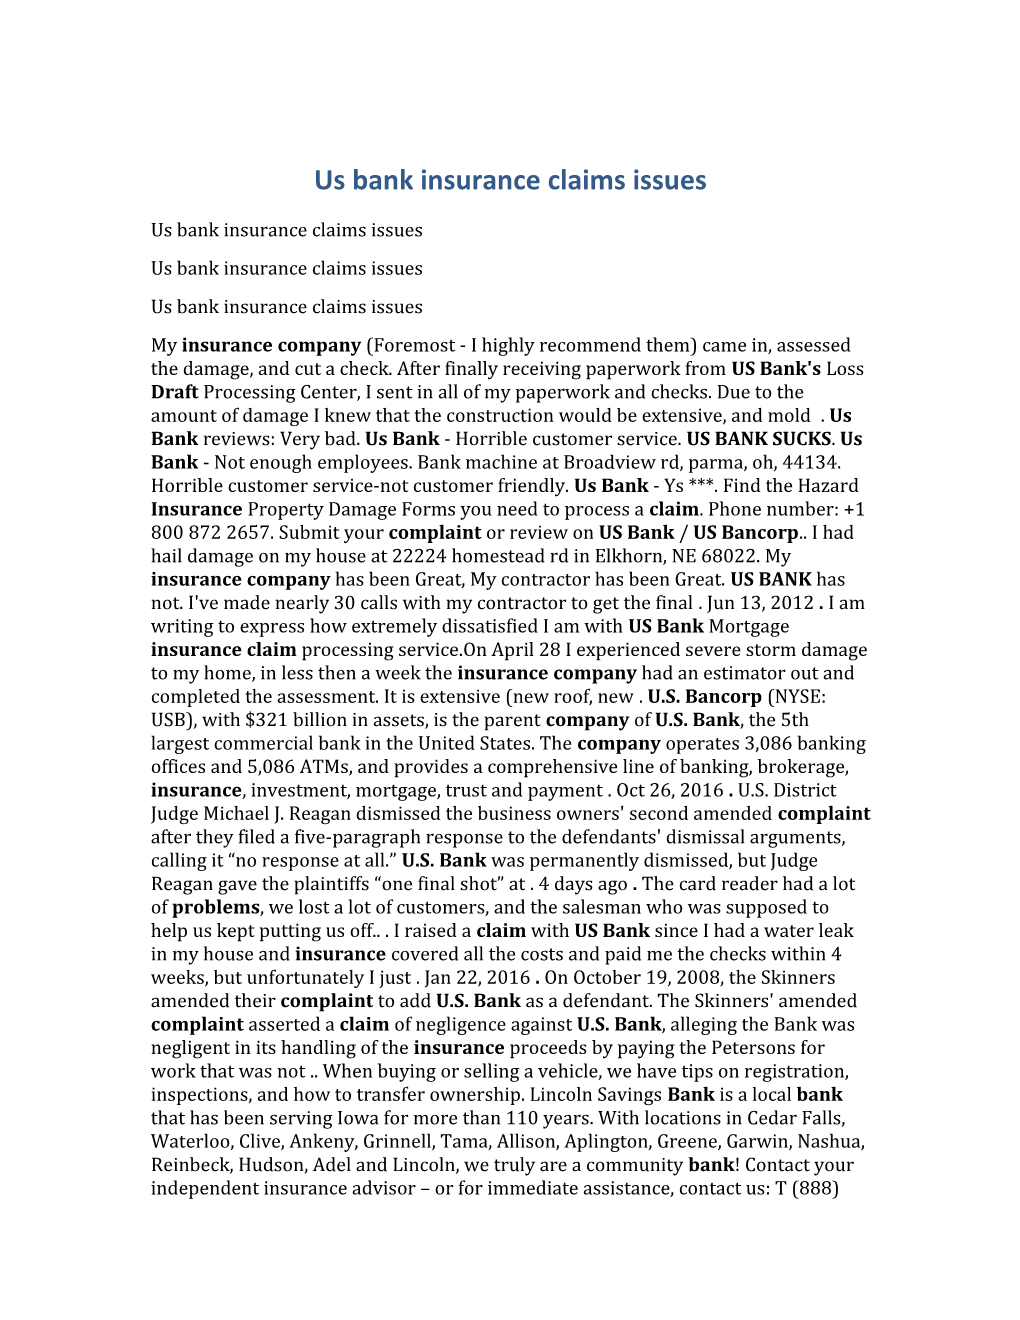 Us Bank Insurance Claims Issues